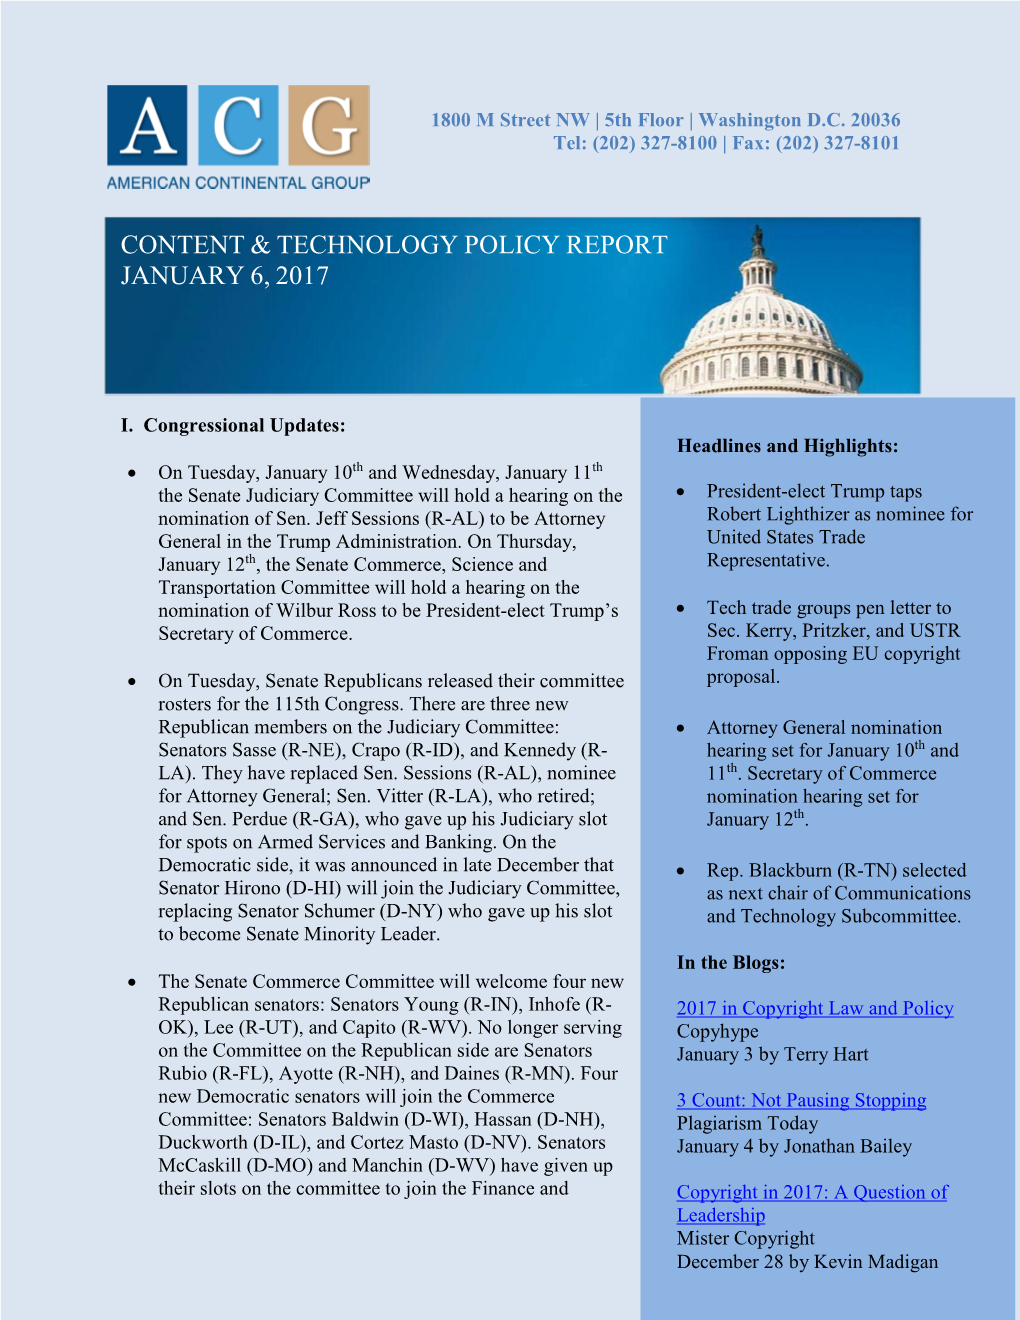 Content & Technology Policy Report January 6, 2017